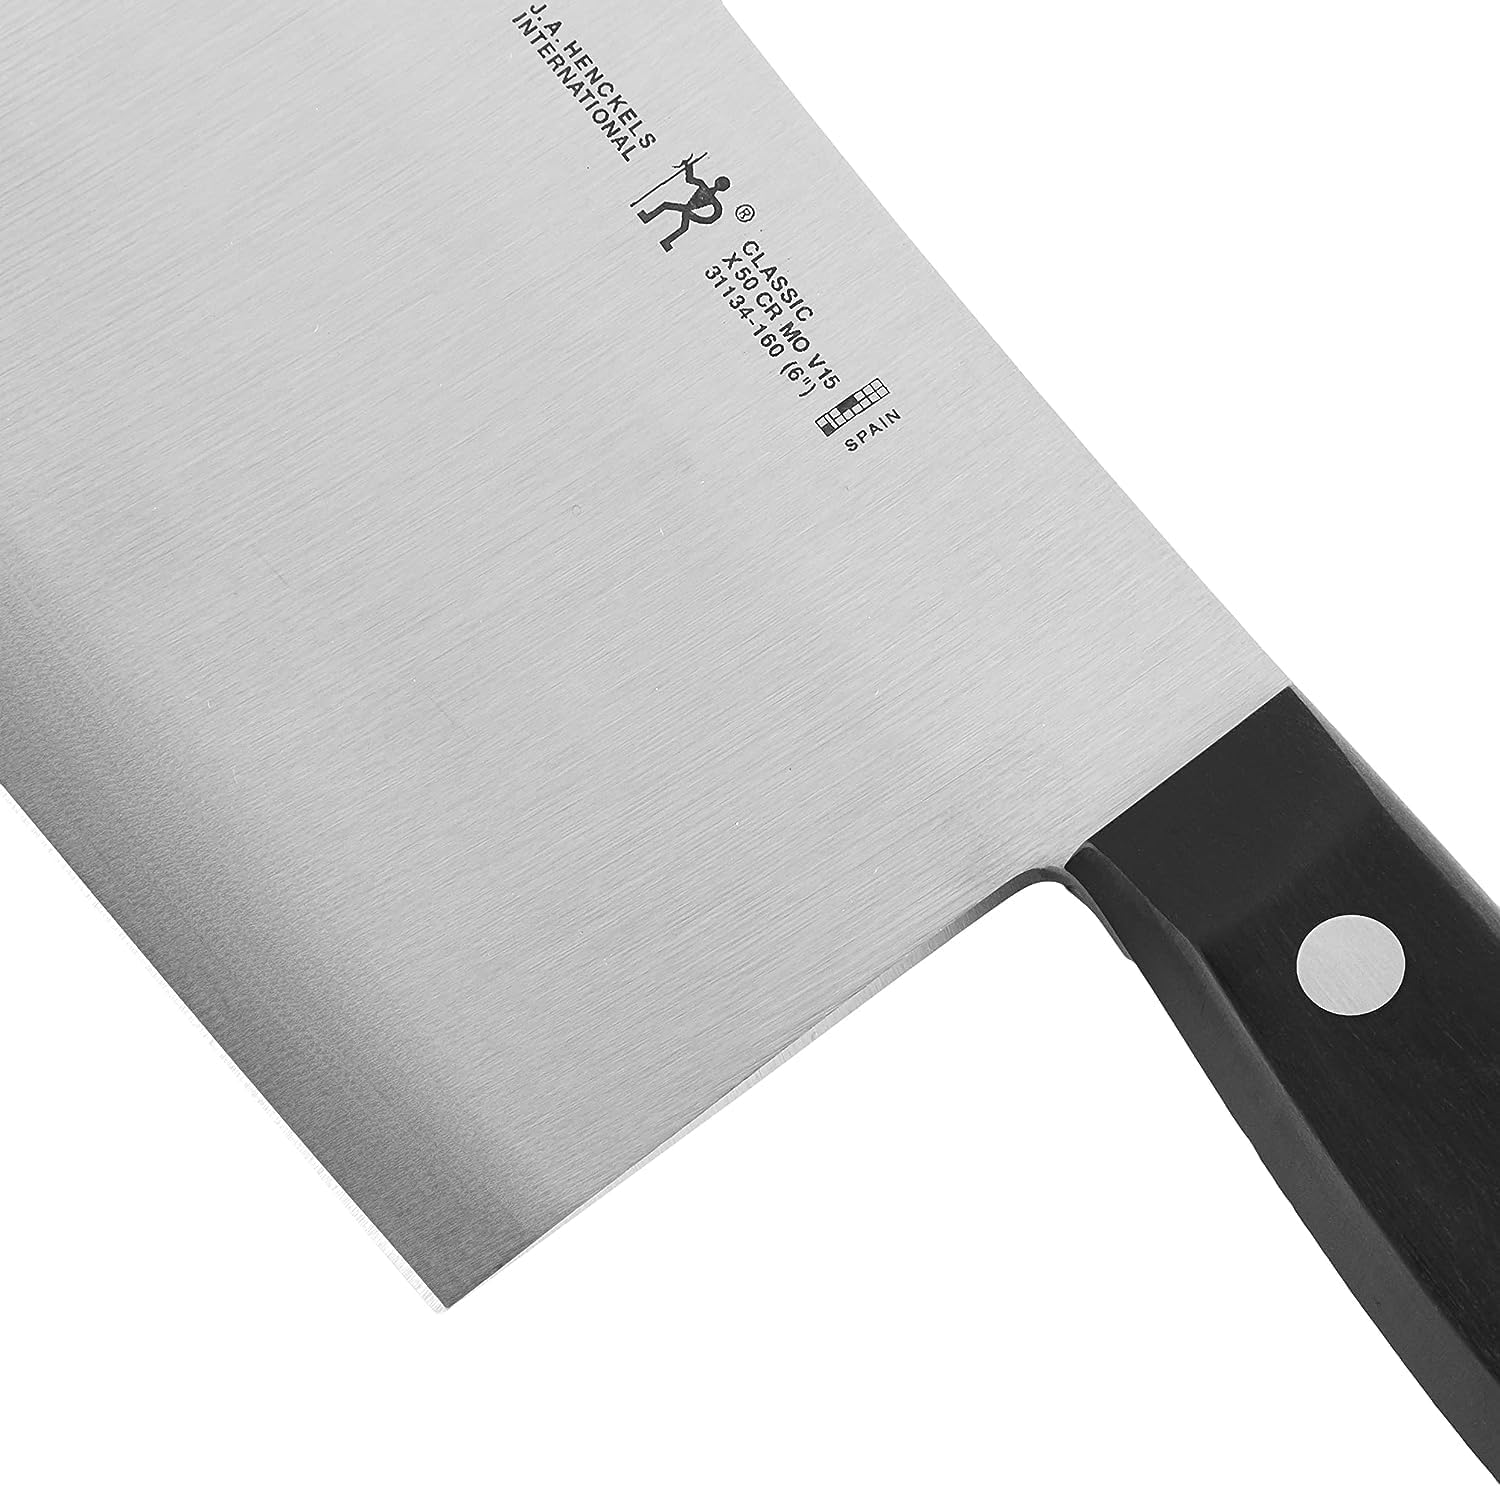 ZWILLING HENCKELS Classic Razor-Sharp 6-inch Meat Cleaver Knife, German Engineered Informed by 100+ Years of Mastery, Black/Stainless Steel